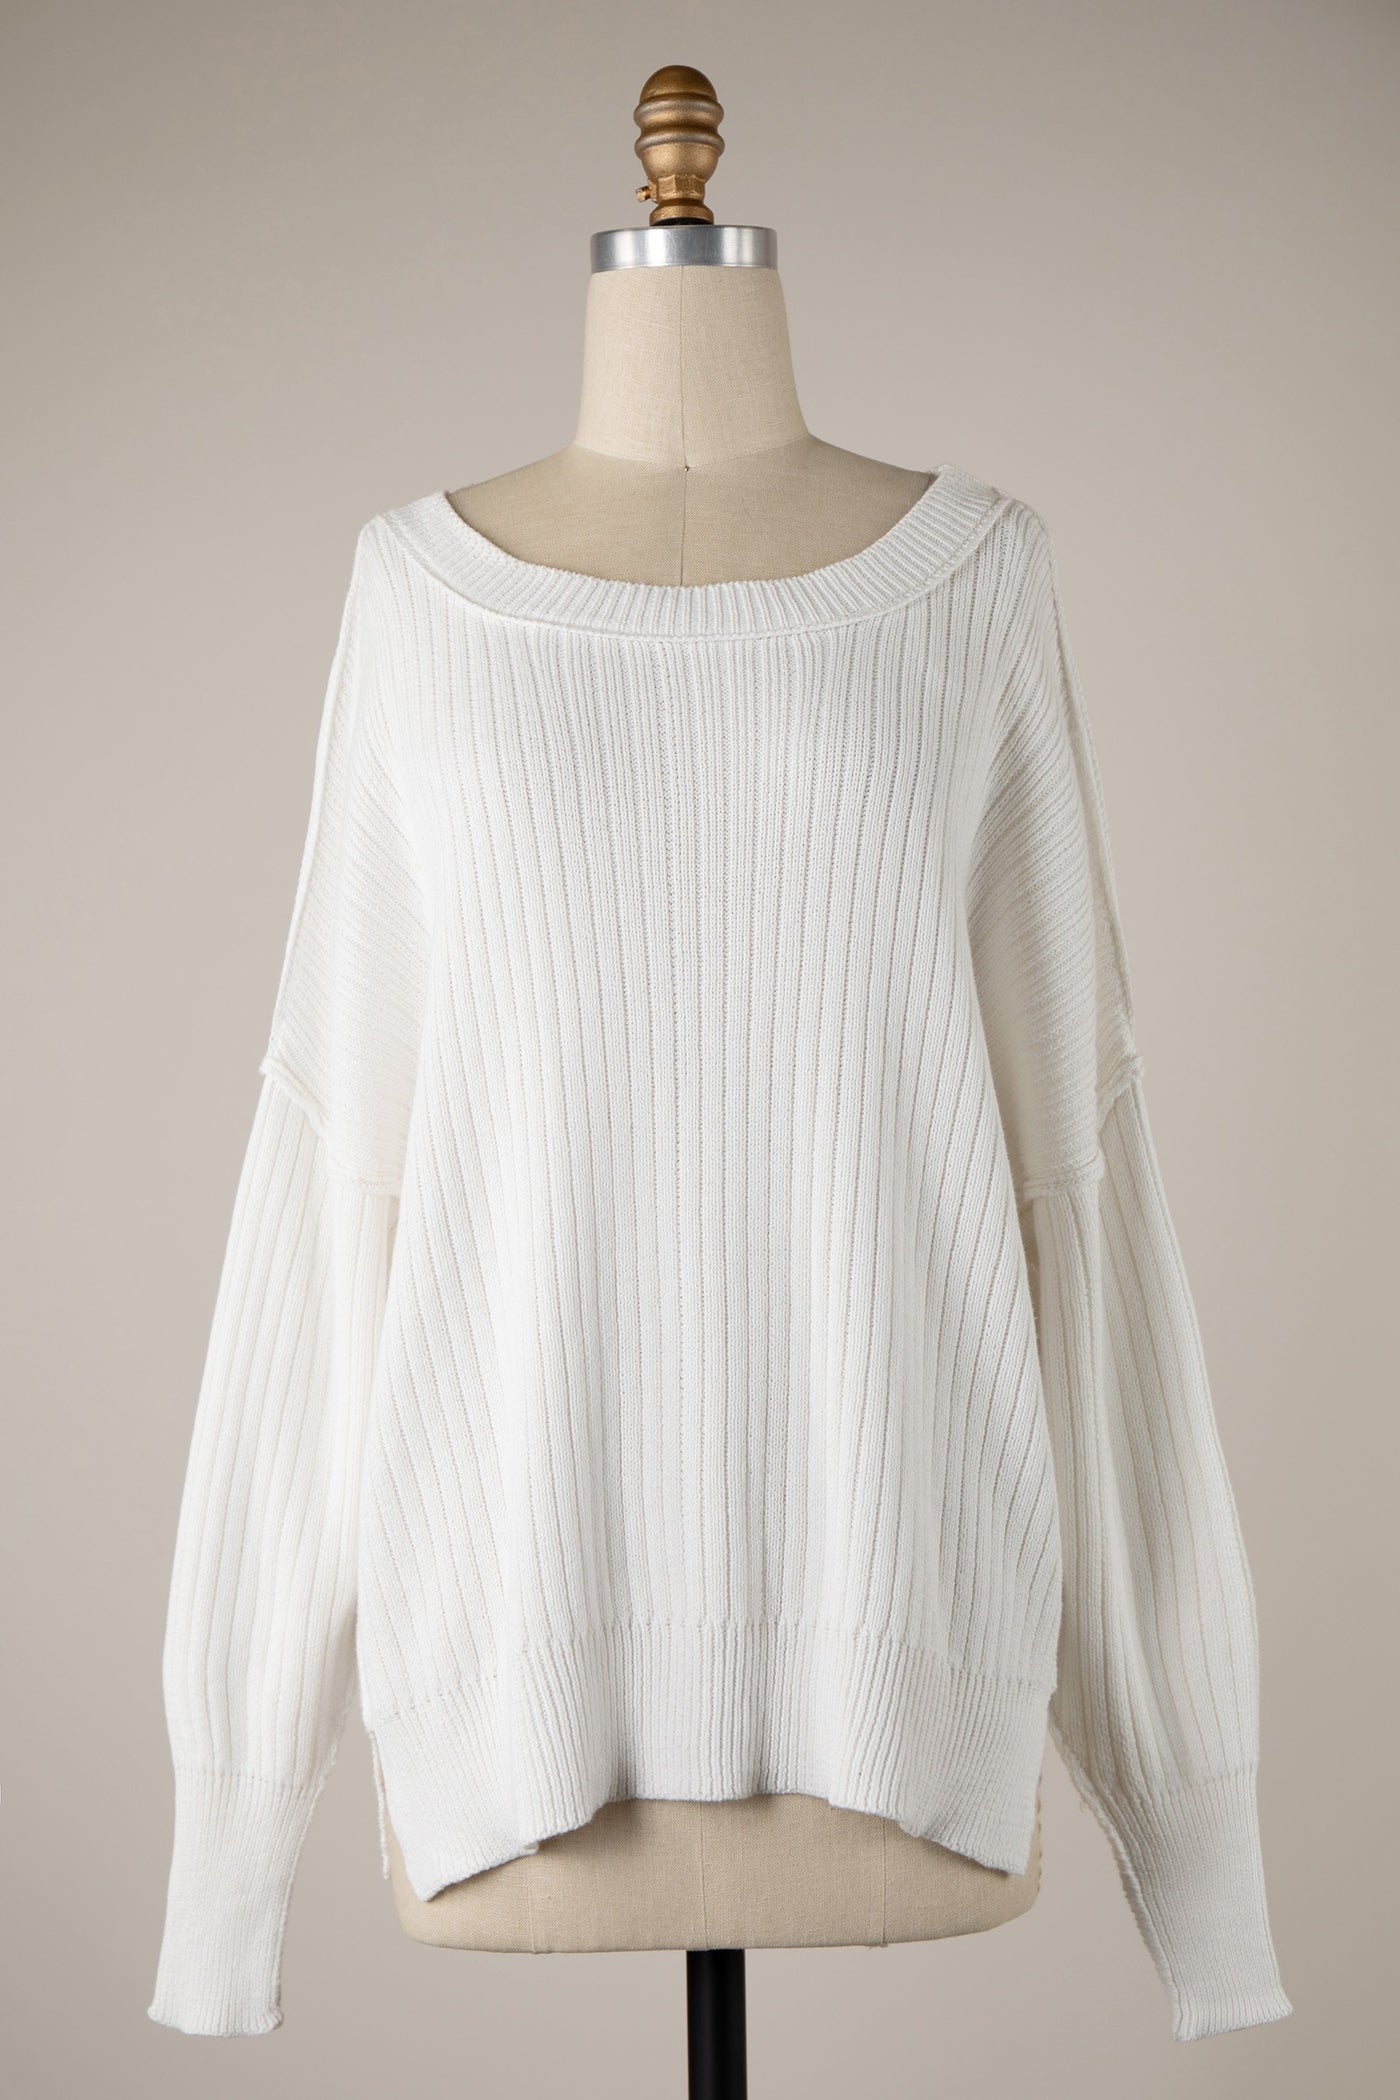 Inside Out Cozy Light Knit Sweater-Cream